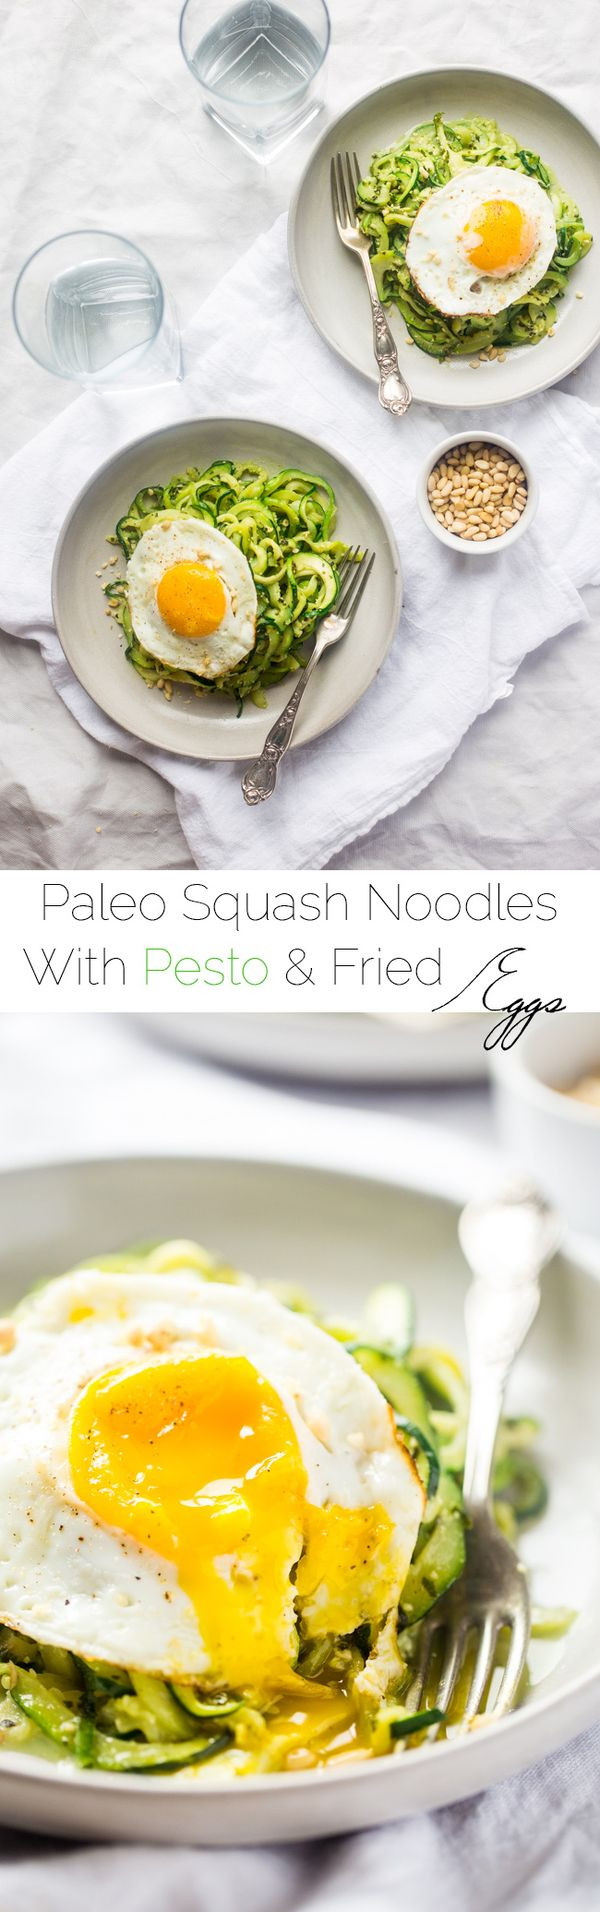 Paleo Zucchini Noodles
 Paleo Zucchini Noodles with Everything Pesto and Fried Eggs